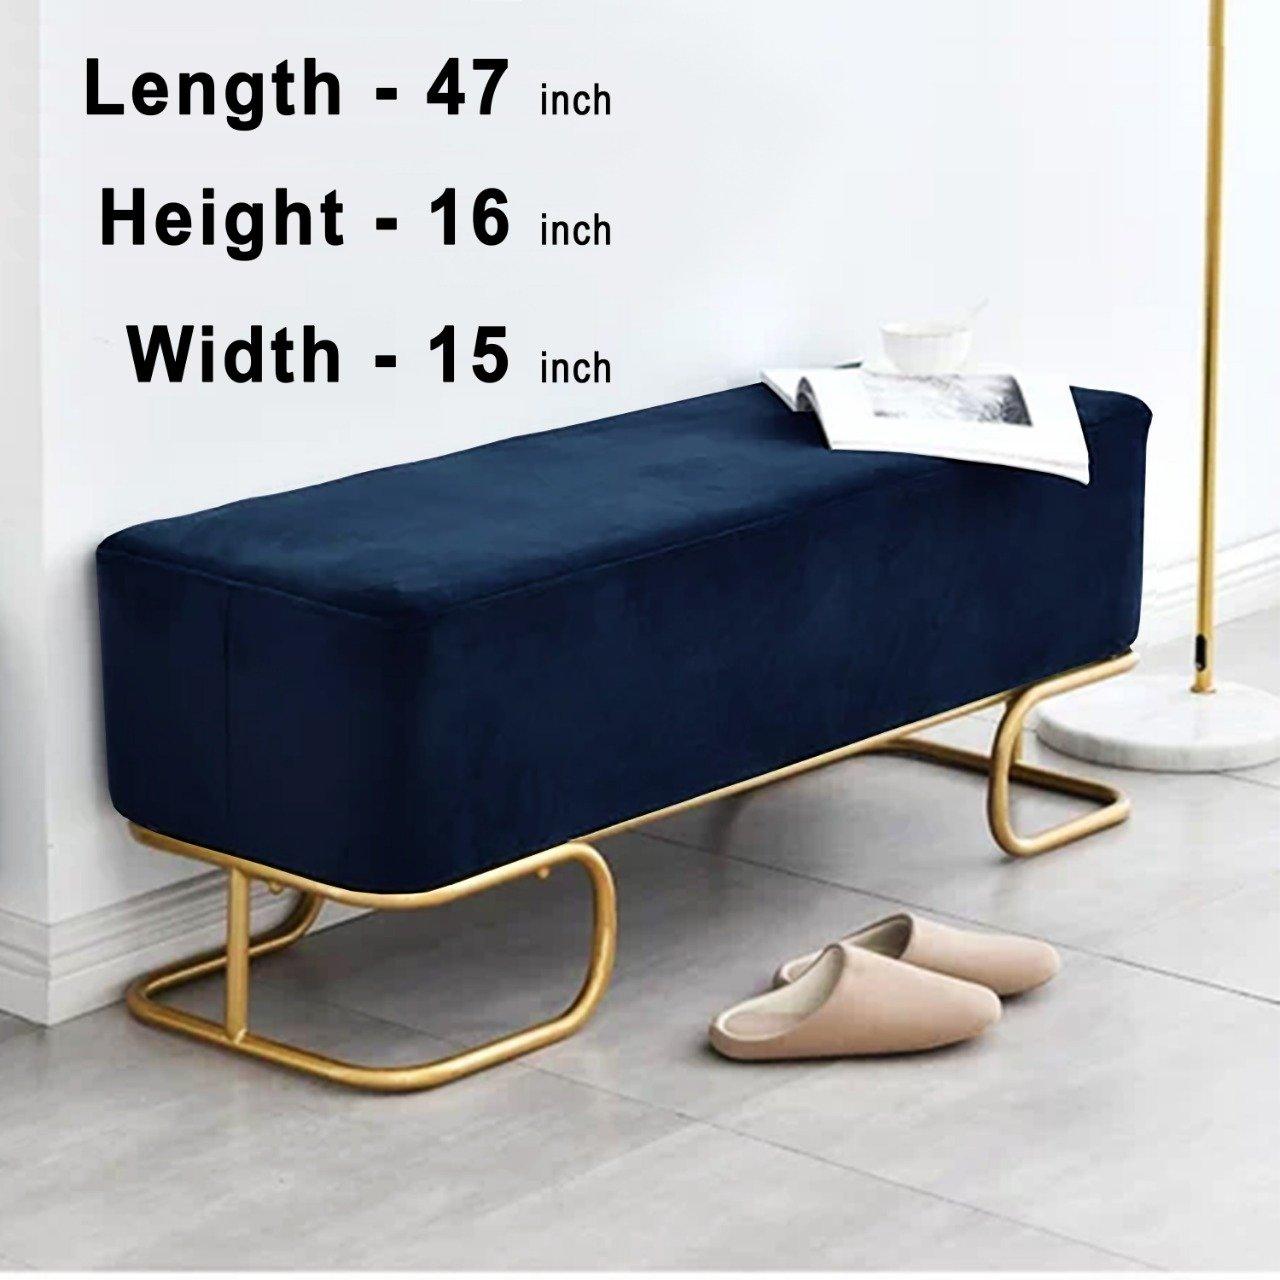 Luxury Wooden stool 3 Seater With Steel Stand -327 - 92Bedding